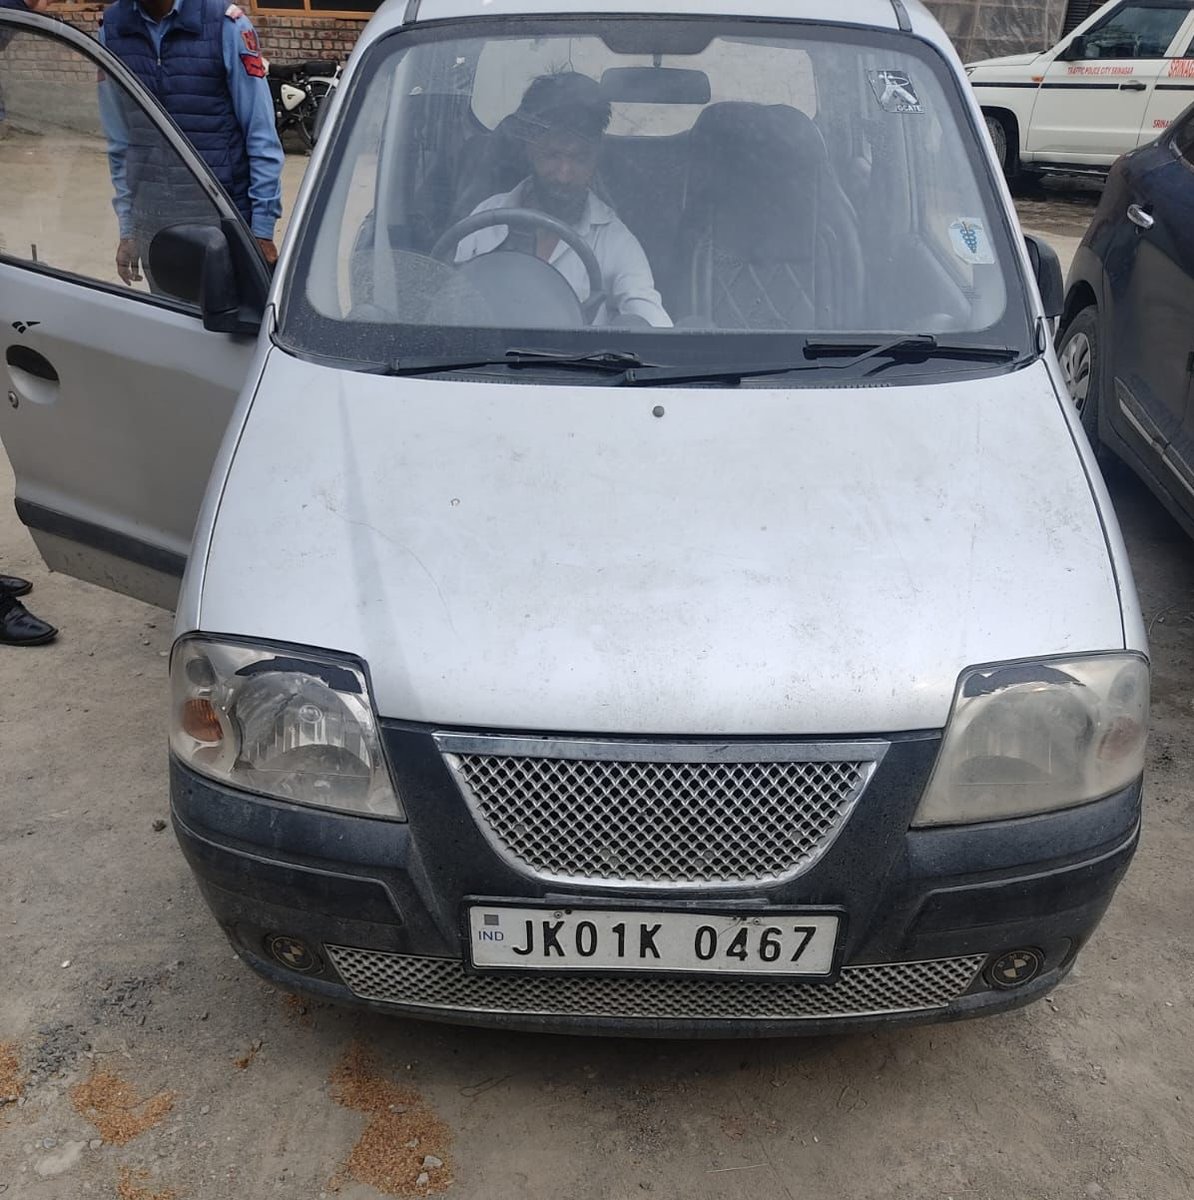 @jksocialissue @Traffic_hqrs @KNSKashmir @OfficeOfLGJandK @MIB_India @DivComKash @diprjk Vehicle involved In Dangerous Driving Seized Under Relevant Sections Of Motor Vehicle Act. Parents Are Requested To Stop Minors From Driving Any Type Of Vehicle.